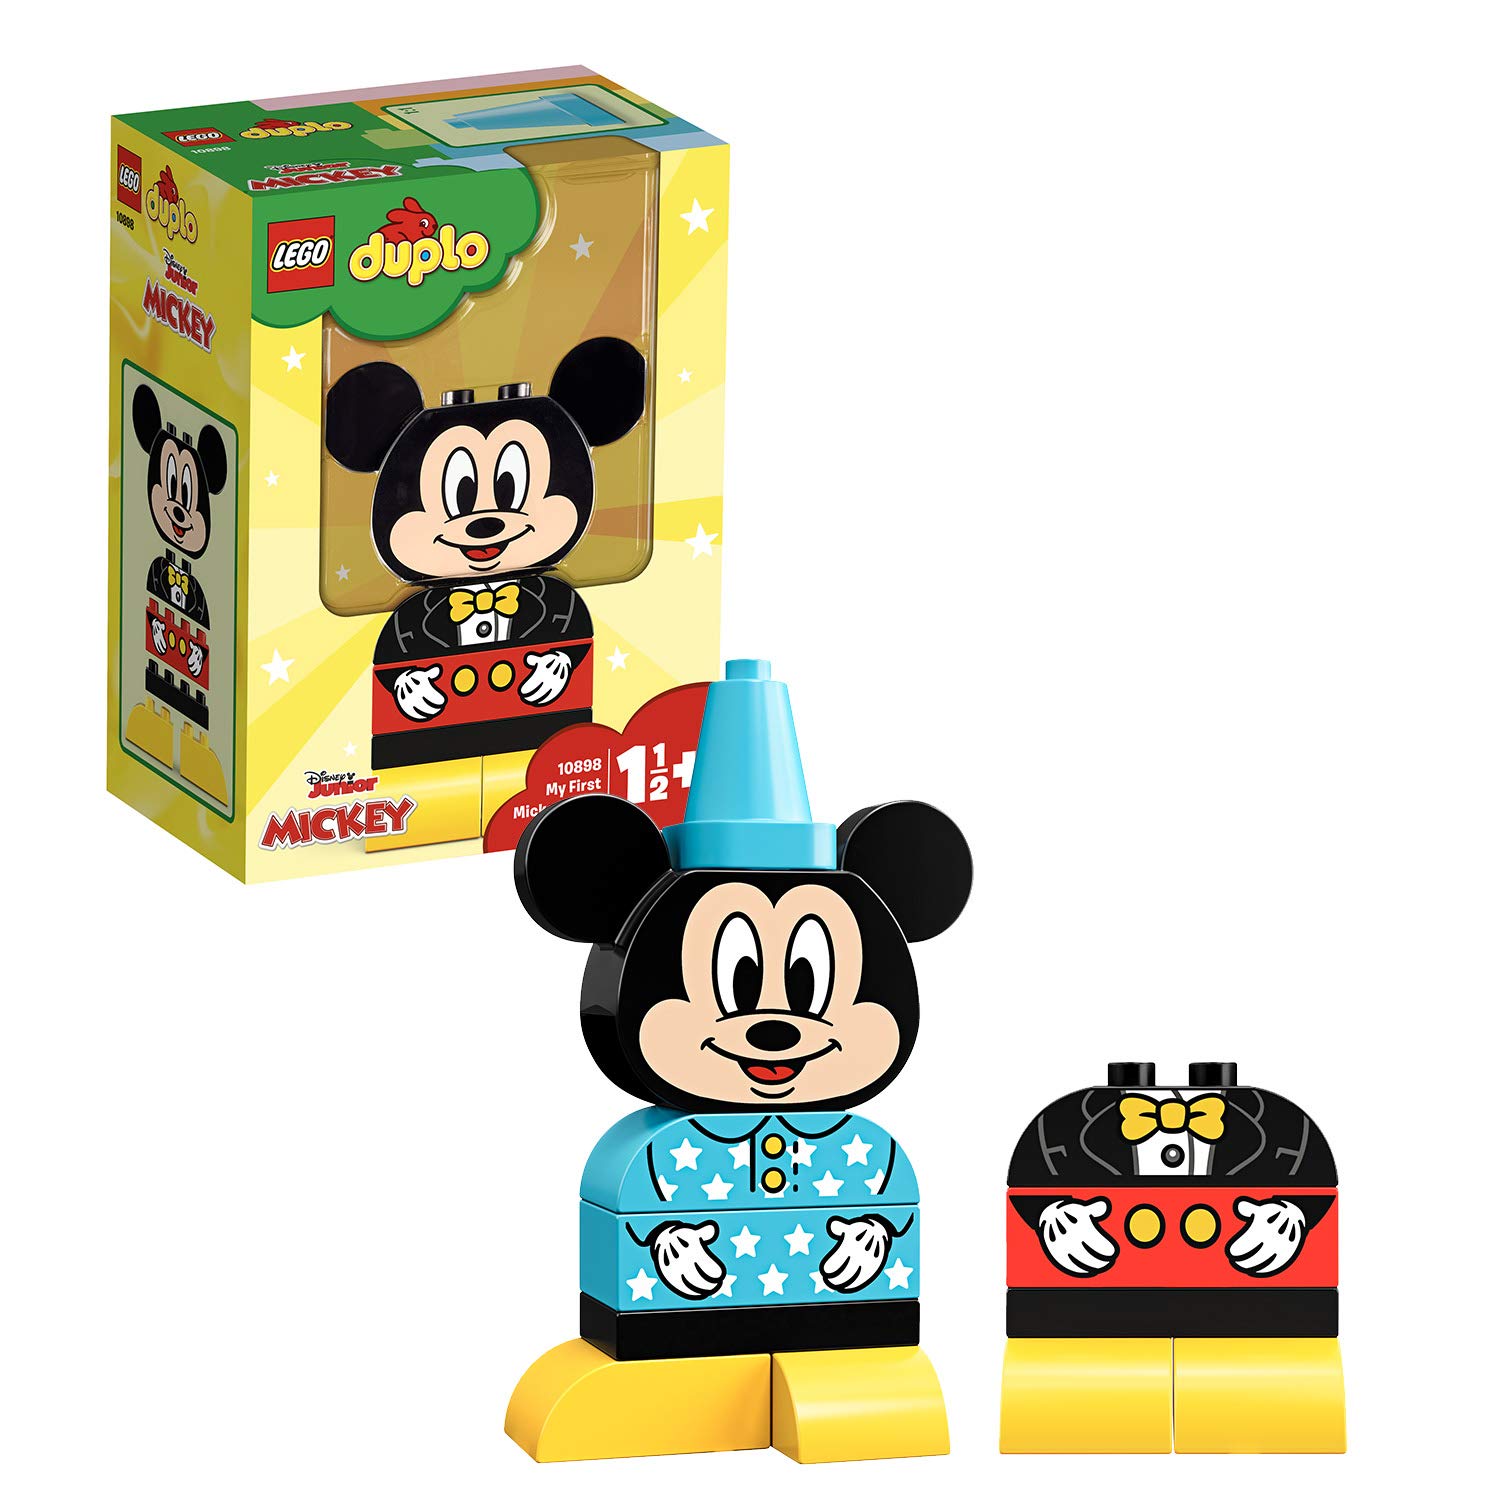 Lego Duplo 10898 My First Mickey Mouse